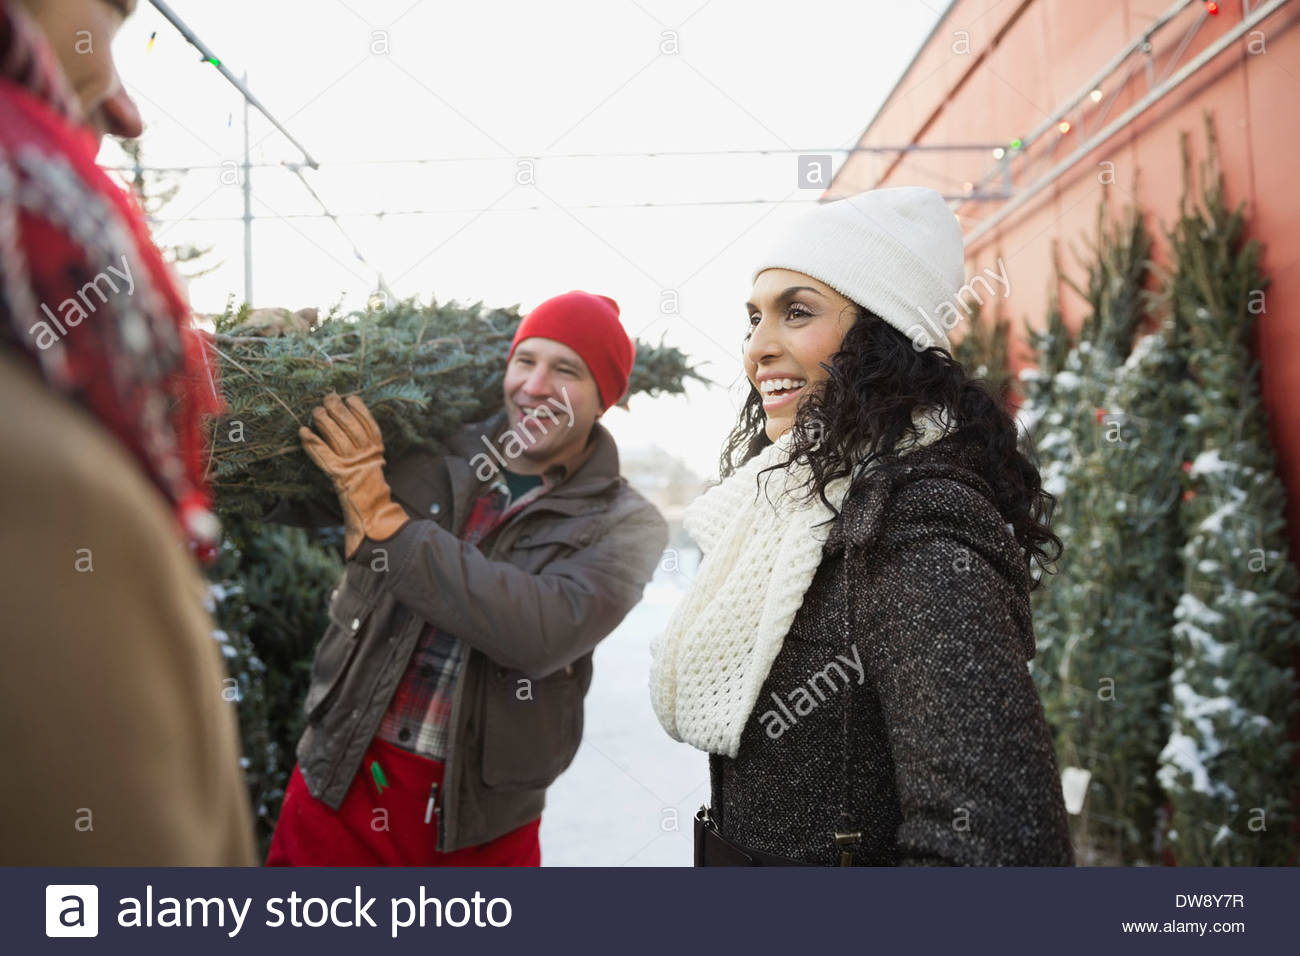 Woman with tree lot owner carrying Christmas tree Stock Photo